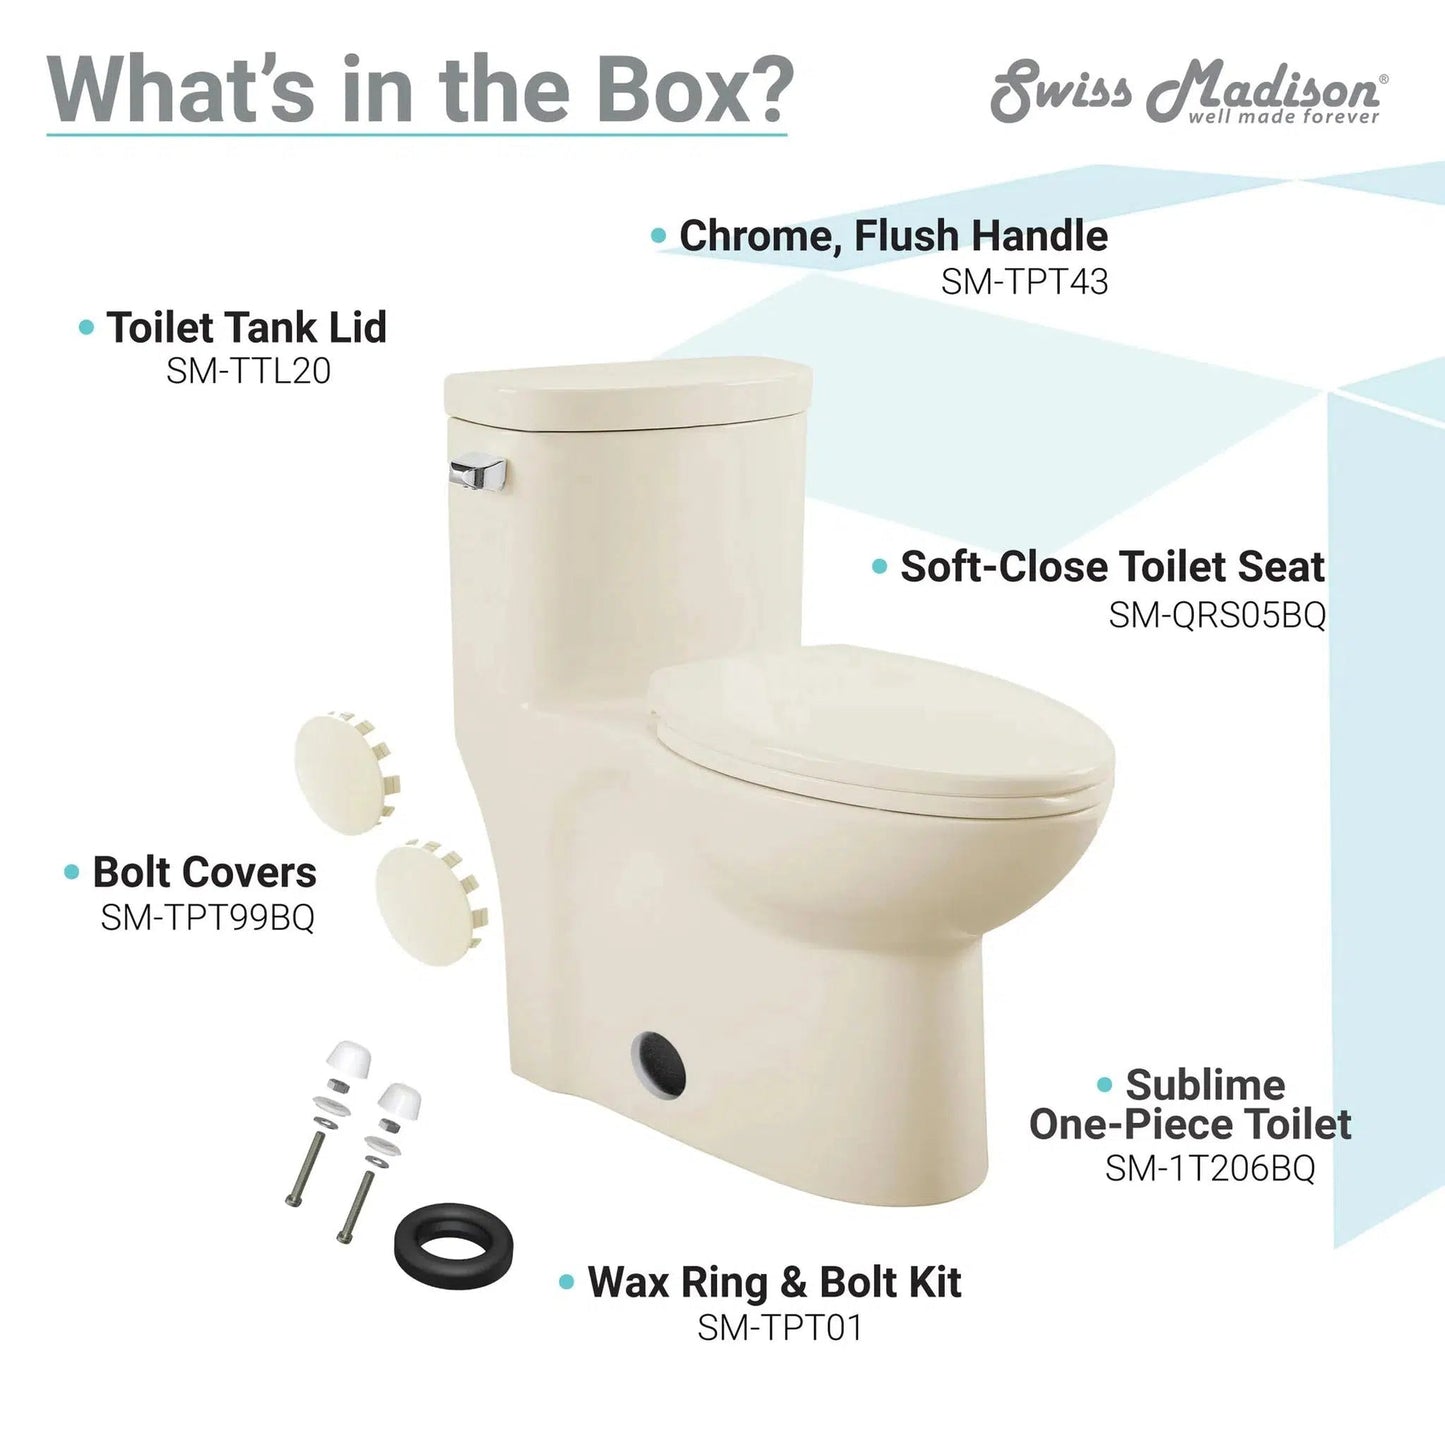 Swiss Madison Sublime 16" x 28" Bisque One-Piece Elongated Floor Mounted Toilet With 1.28 GPF Side Flush Function